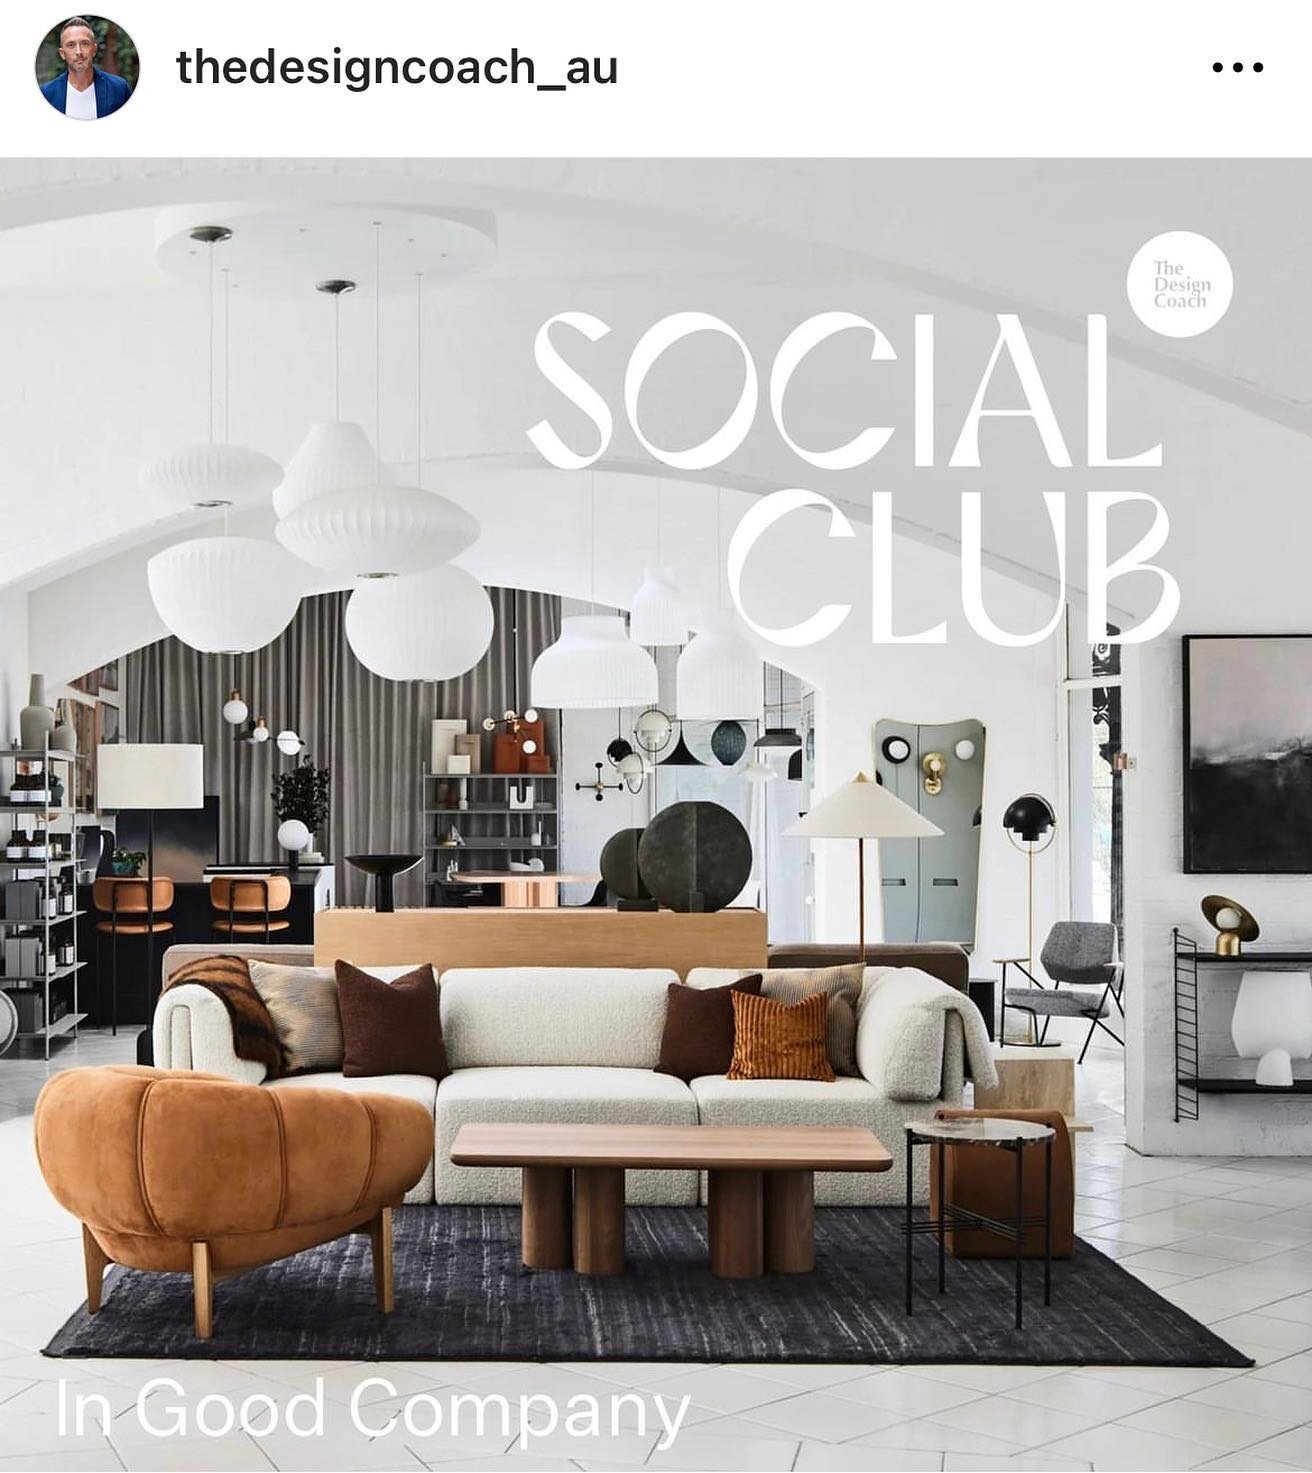 Have you heard about @thedesigncoach_au TDC Social Club?! ✖️ established by Andrew Mitchell and the team, The Design Coach is a community of interior design and architecture professionals who come together to learn and grow their businesses in a rela